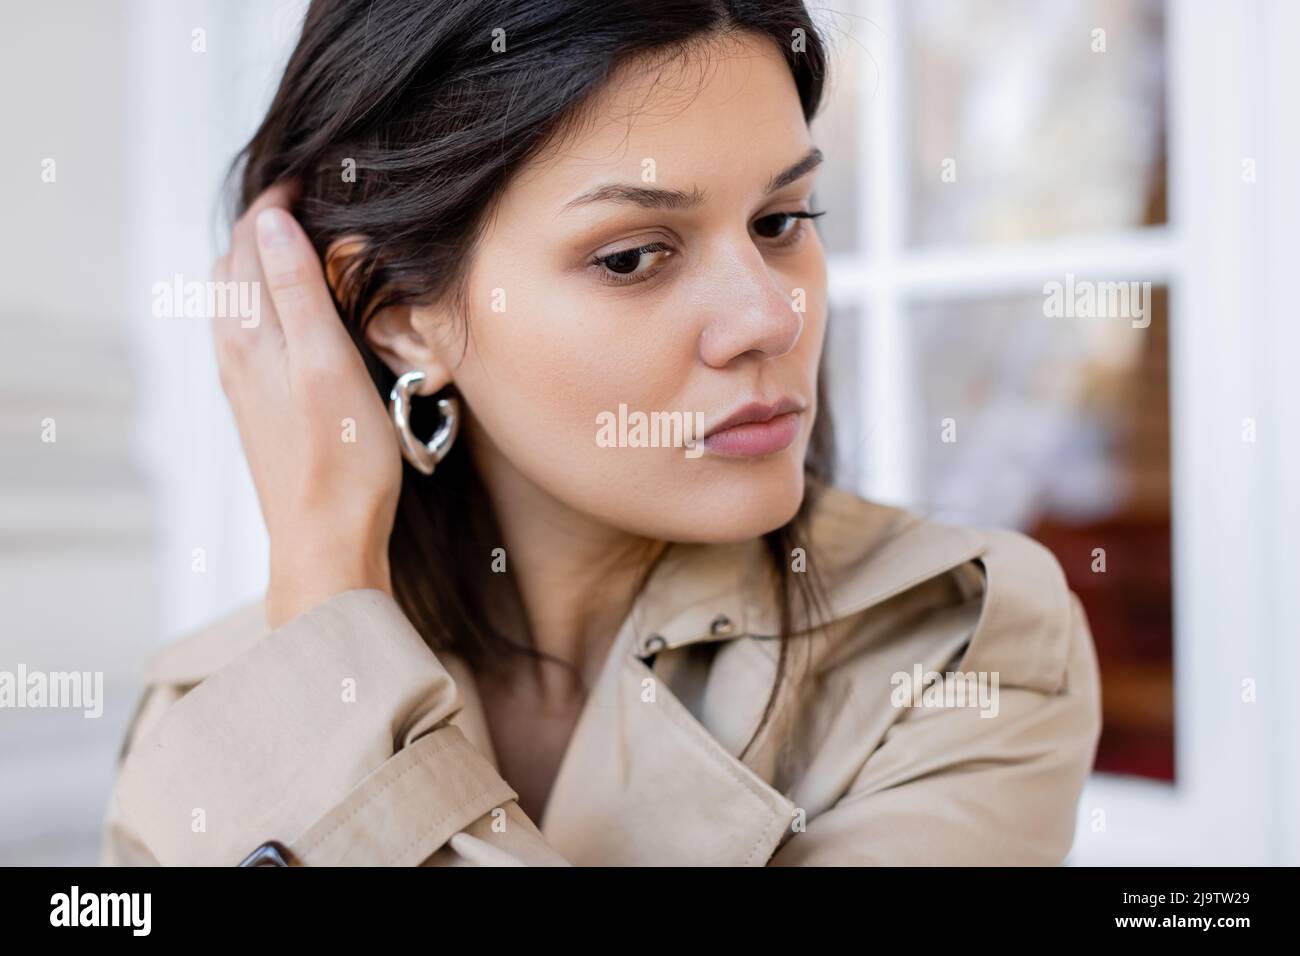 portrait of brunette woman in beige trench coat and hoop earring adjusting hair outside Stock Photo